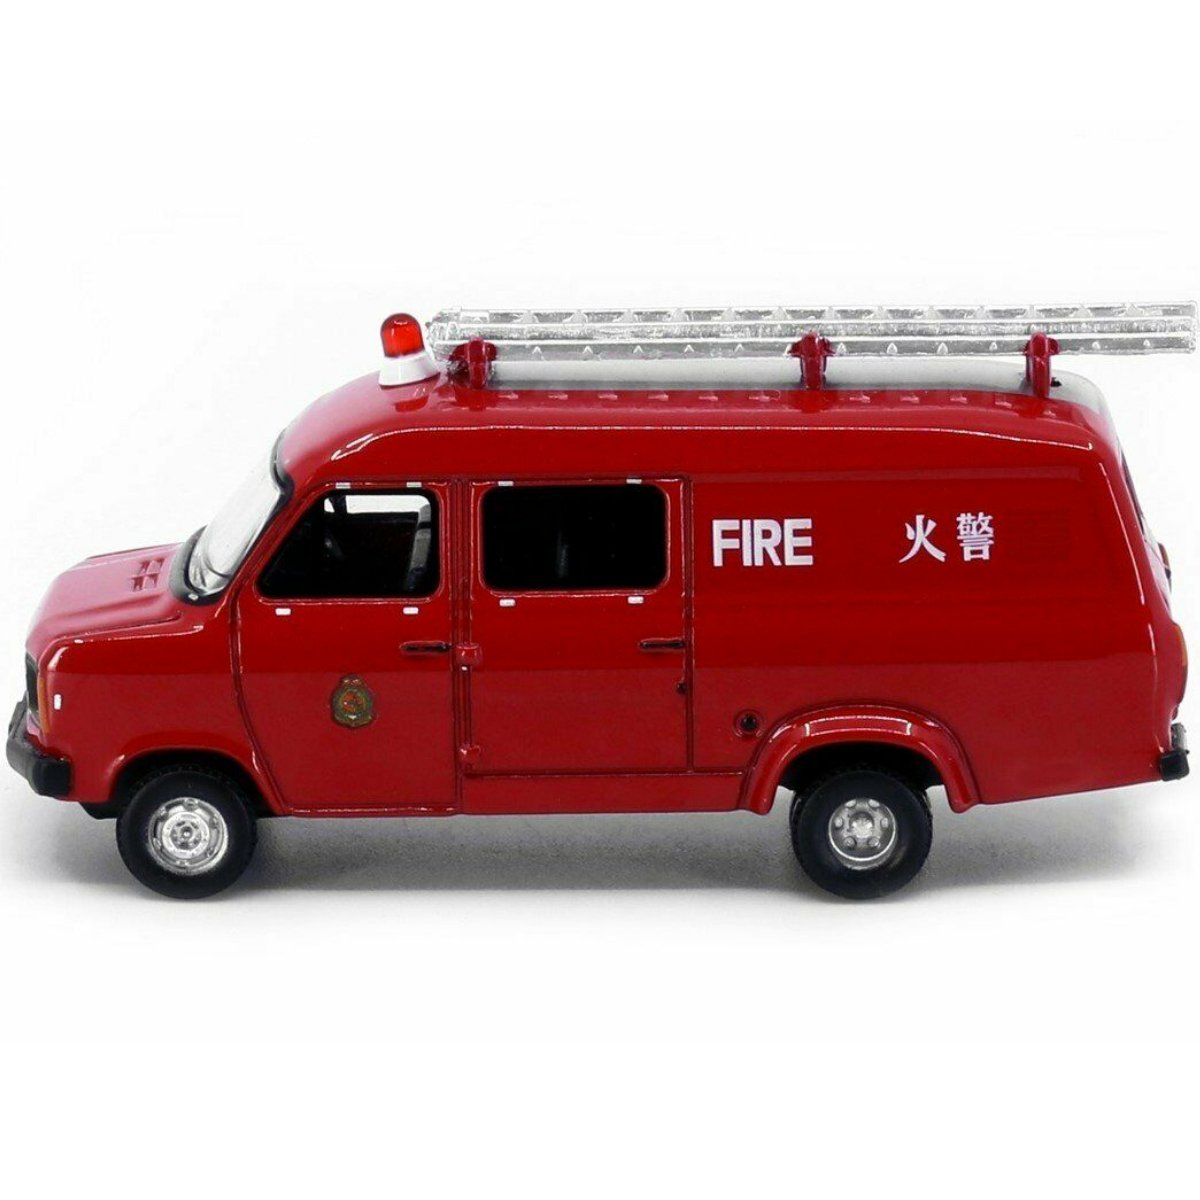 Tiny Models 1980s Light Rescue Unit F311 HKFSD (1:76 Scale) - Phillips Hobbies